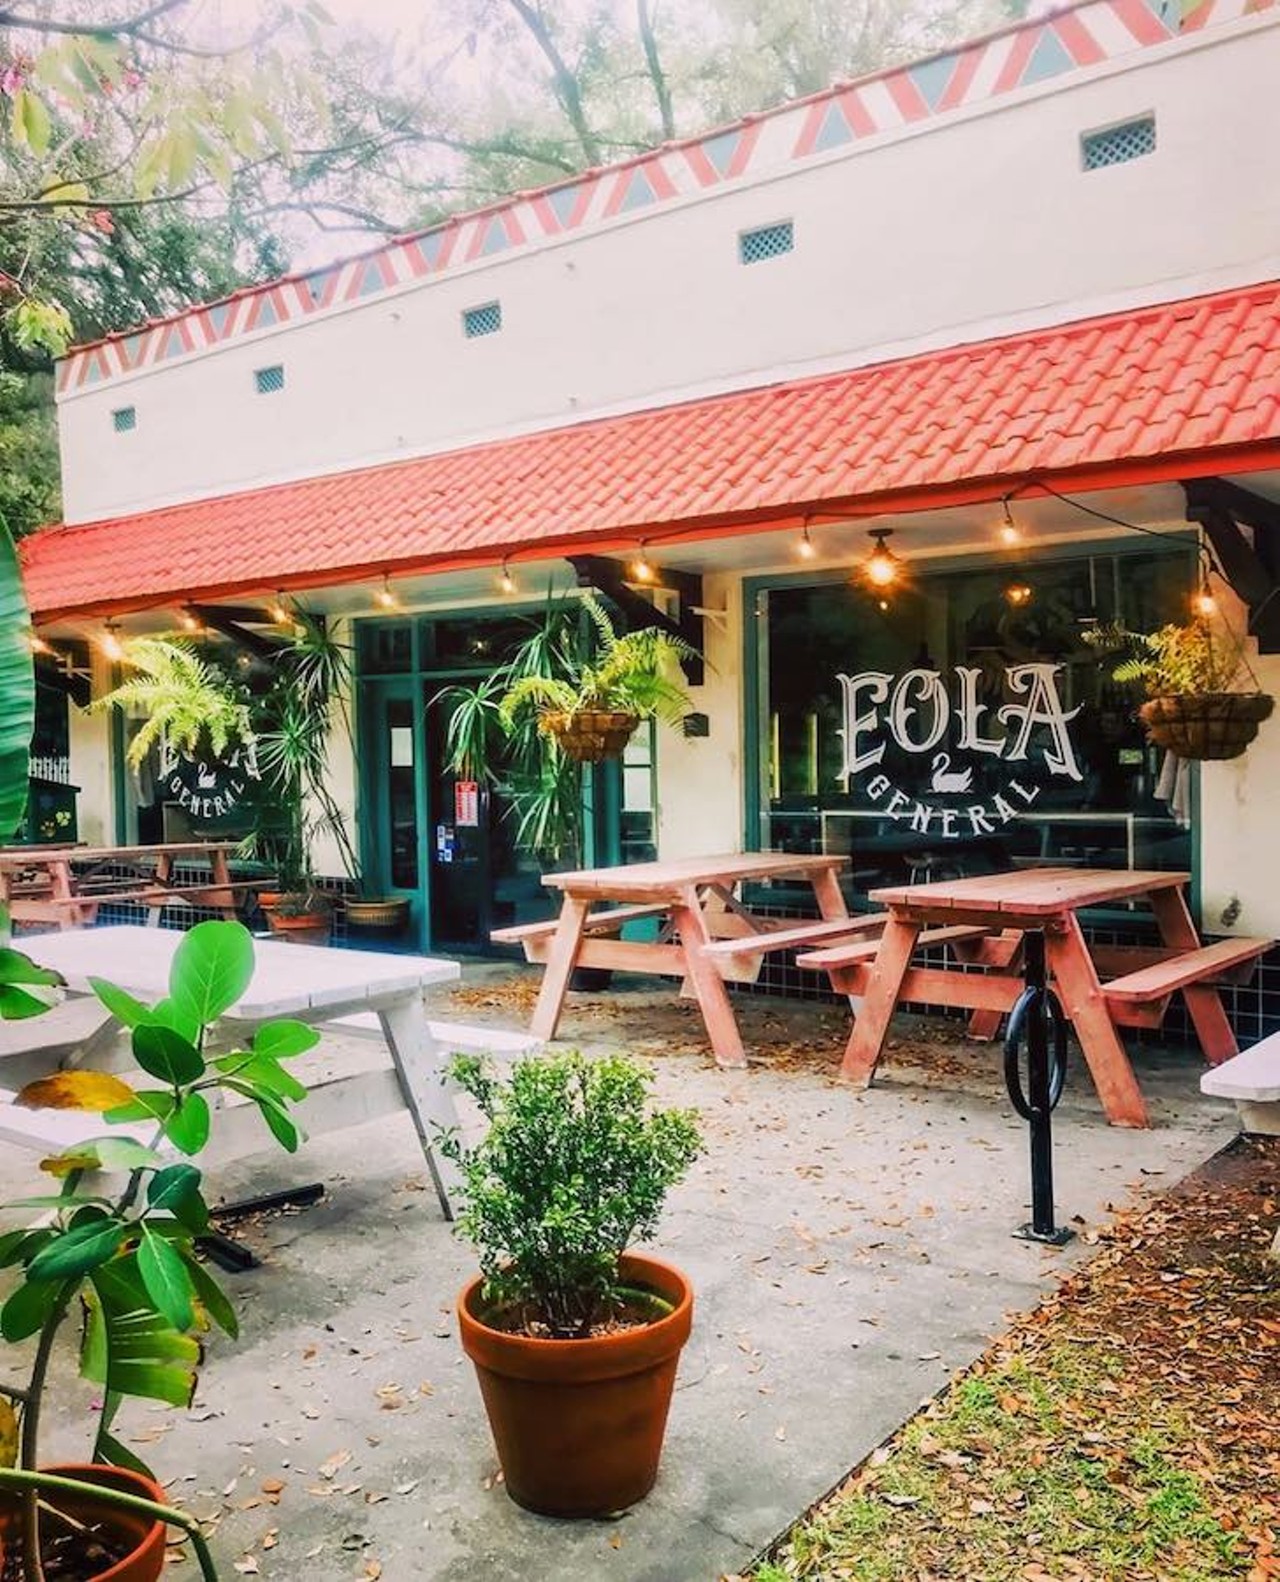 Eola General 
522 E. Amelia St., 407-723-8496
Eola General has reopened their patio, with tables spaced appropriately and increased sanitizing in place, given patron the option to eat their take-out food outside.
Photo via Eola General/Facebook